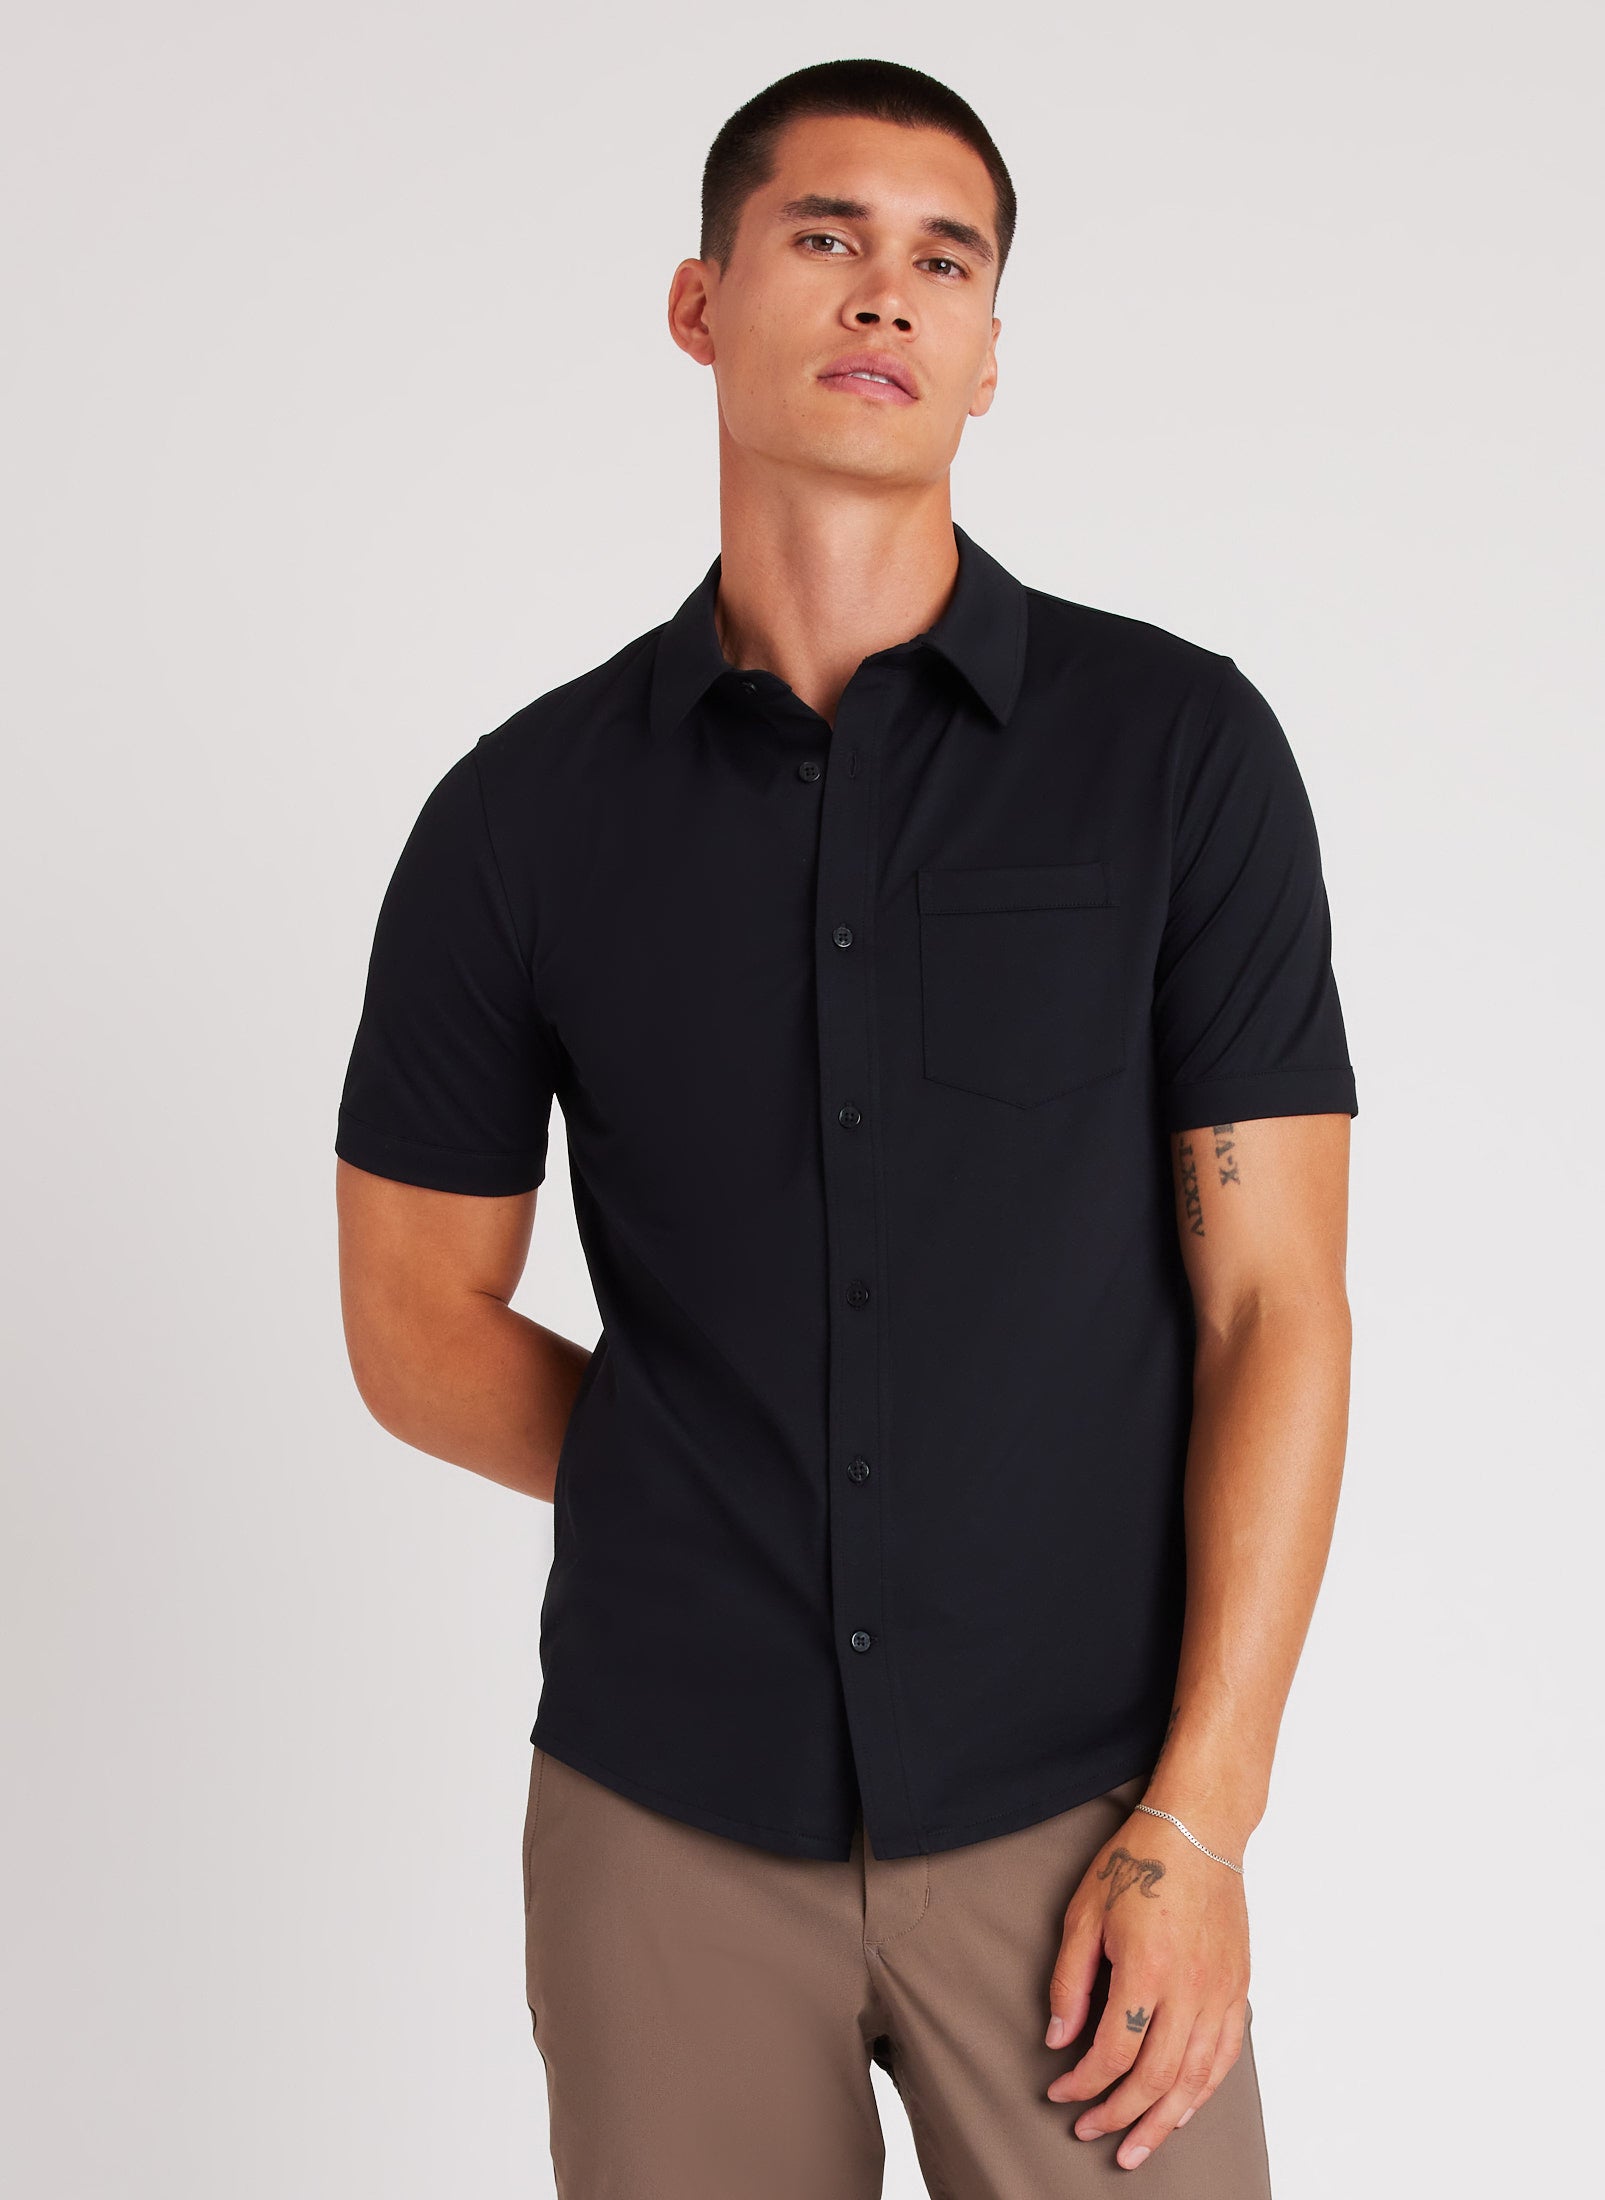 Best Short Sleeve Button Up Shirts - VSTYLE for Men